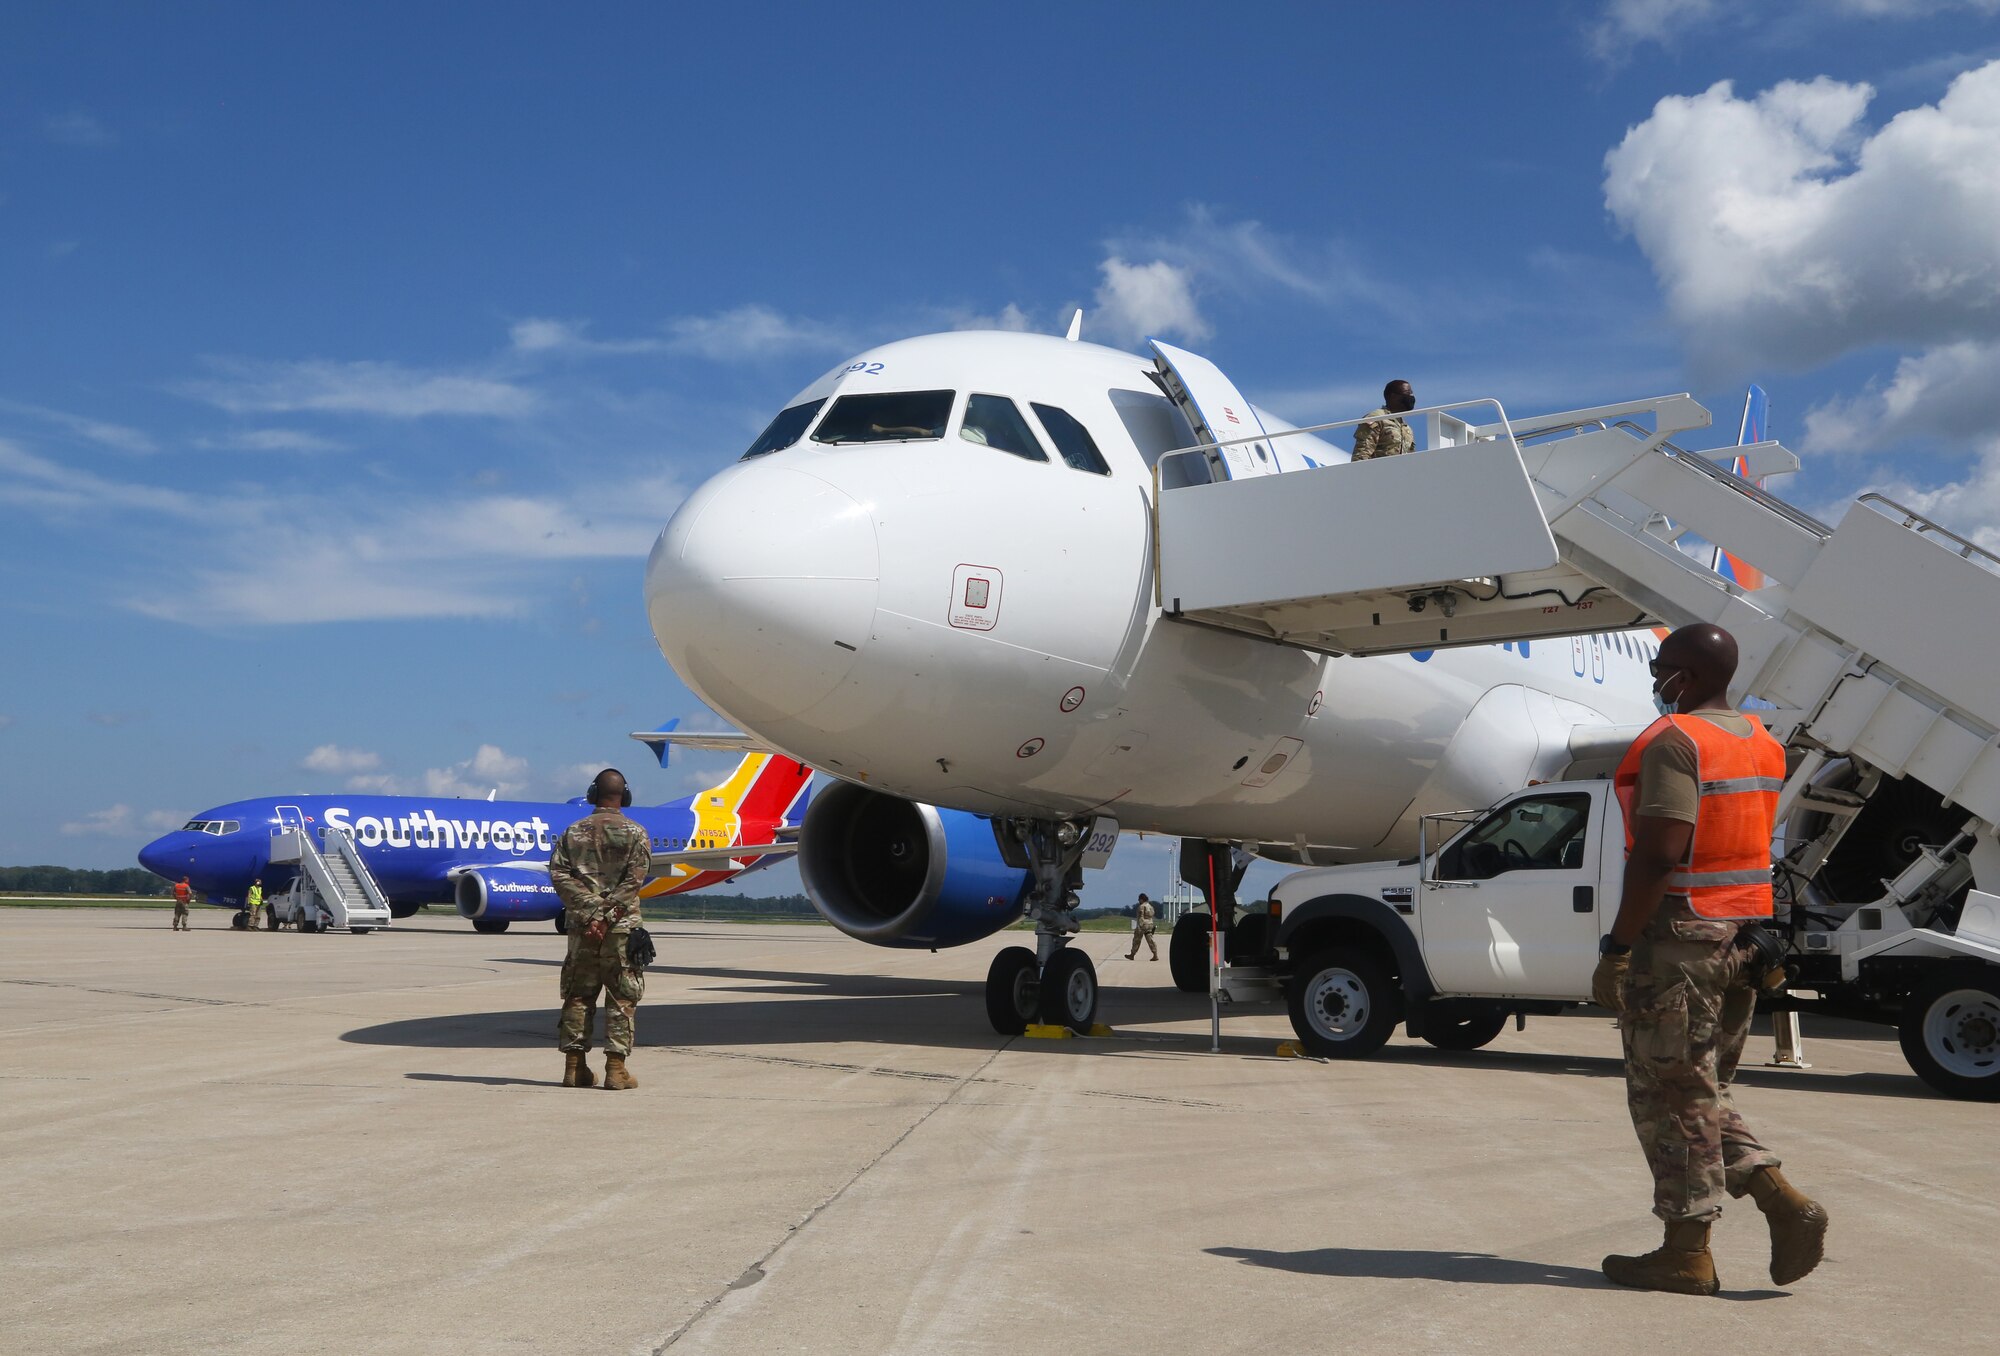 U.S. Soldiers assigned to the 271st Movement Control Team and Kentucky National Guard Airmen assigned to the 123rd Contingency Response team receive a plane of Afghan evacuees at Volk Field, Wisconsin, Aug. 29, 2021. The Department of Defense, through U.S. Northern Command, and in support of the Department of State and Department of Homeland Security, is temporarily housing up to 50,000 Afghan evacuees around the United States.